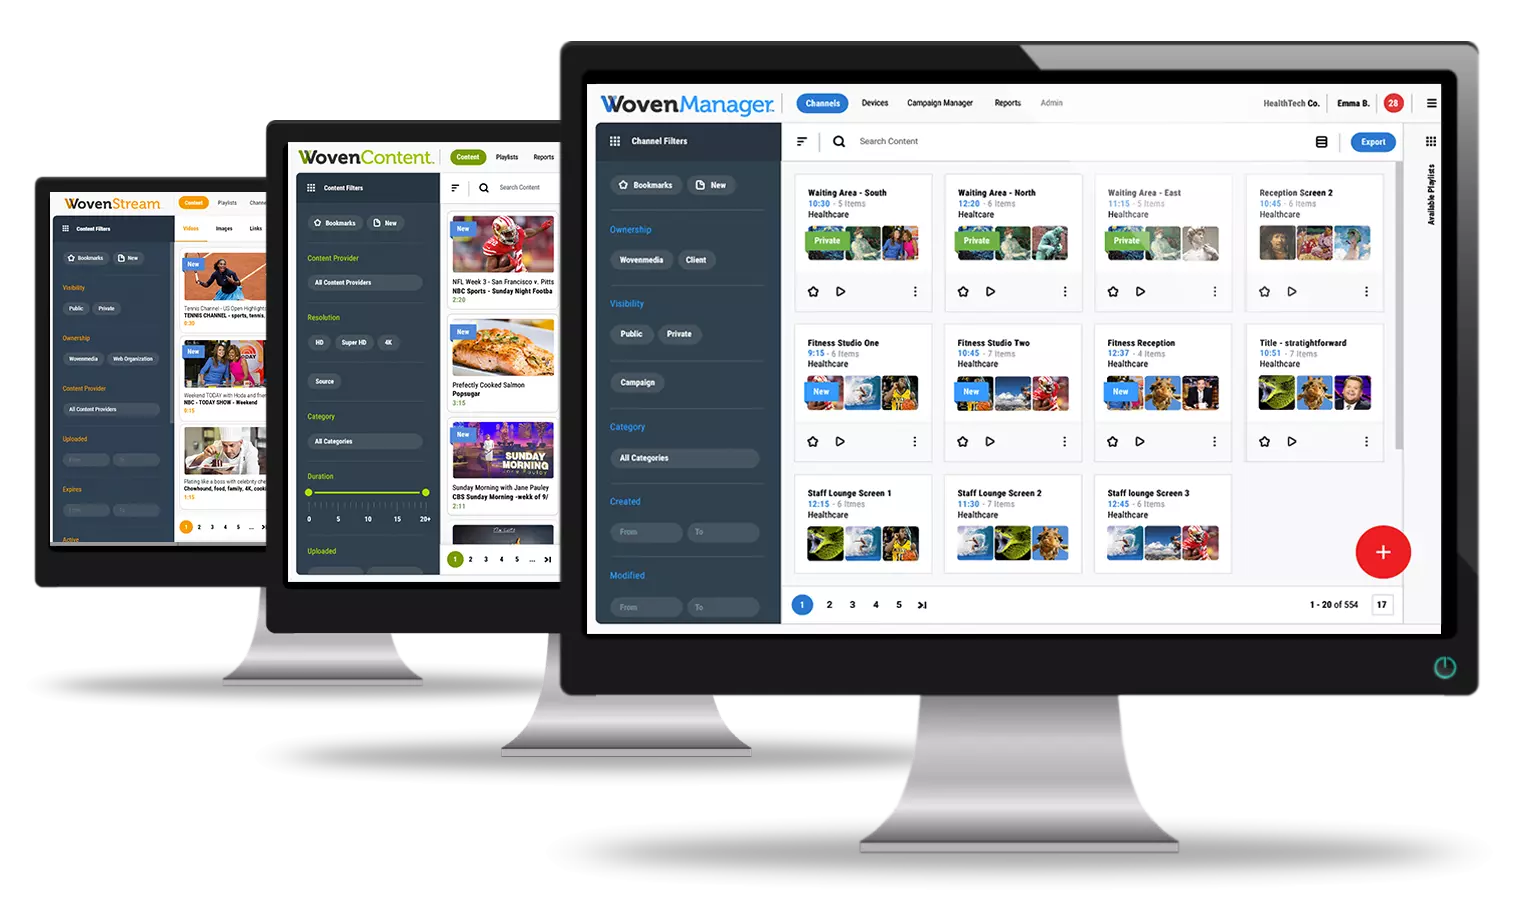 Wovenmanager, wovencontent and wovenstream digital signage solution platforms